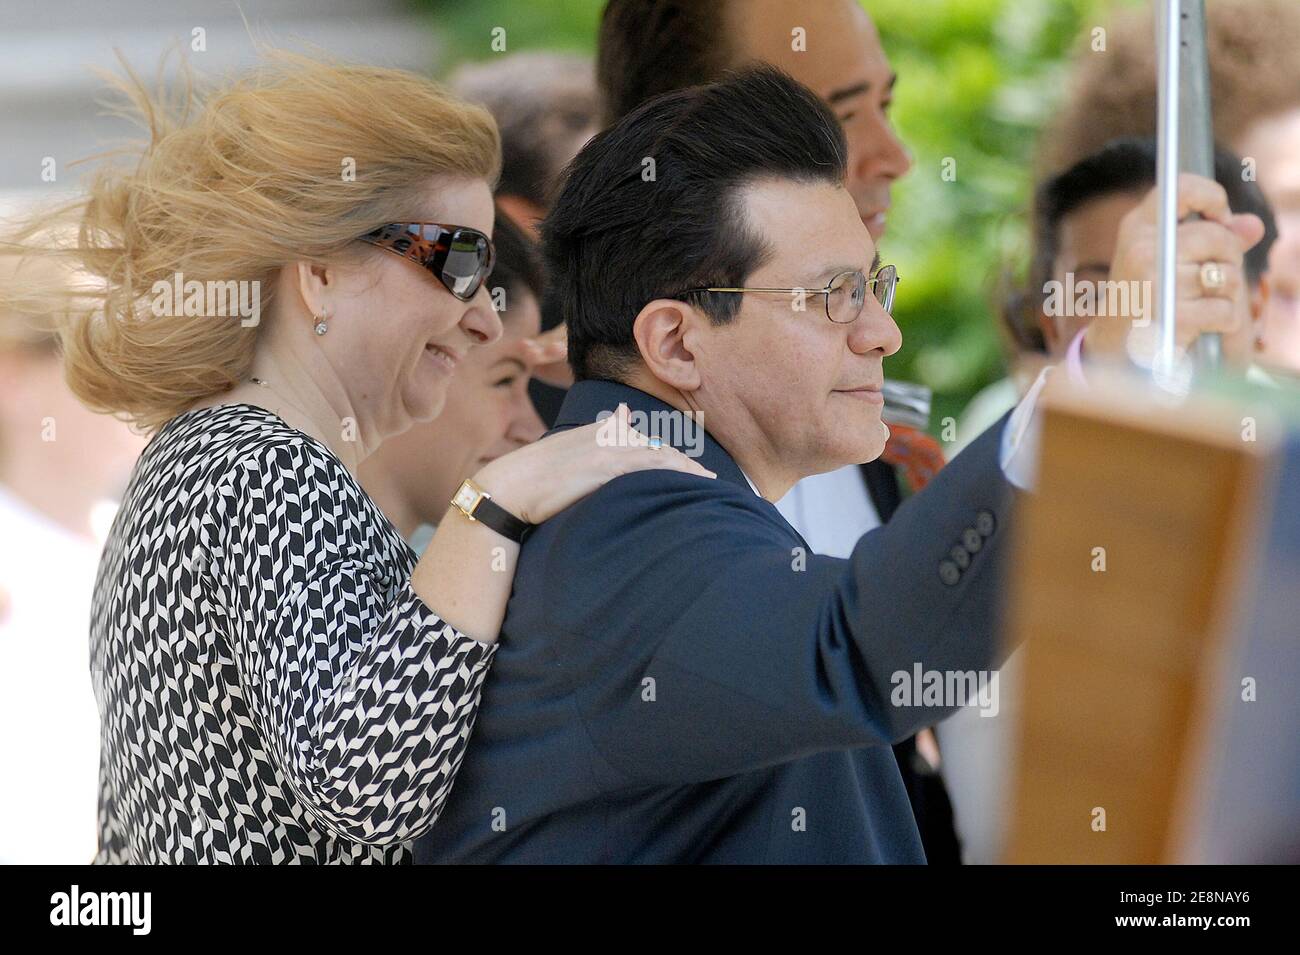 U.S. Attorney General Alberto Gonzales and his wife Rebecca watch as President George W. Bush departs from the White House, in Washington, DC, USA, on August 9, 2007. Bush will meet with French President Nicolas Sarkozy this weekend in Kennebunkport, Maine. Photo by Olivier Douliery/ABACAPRESS.COM Stock Photo